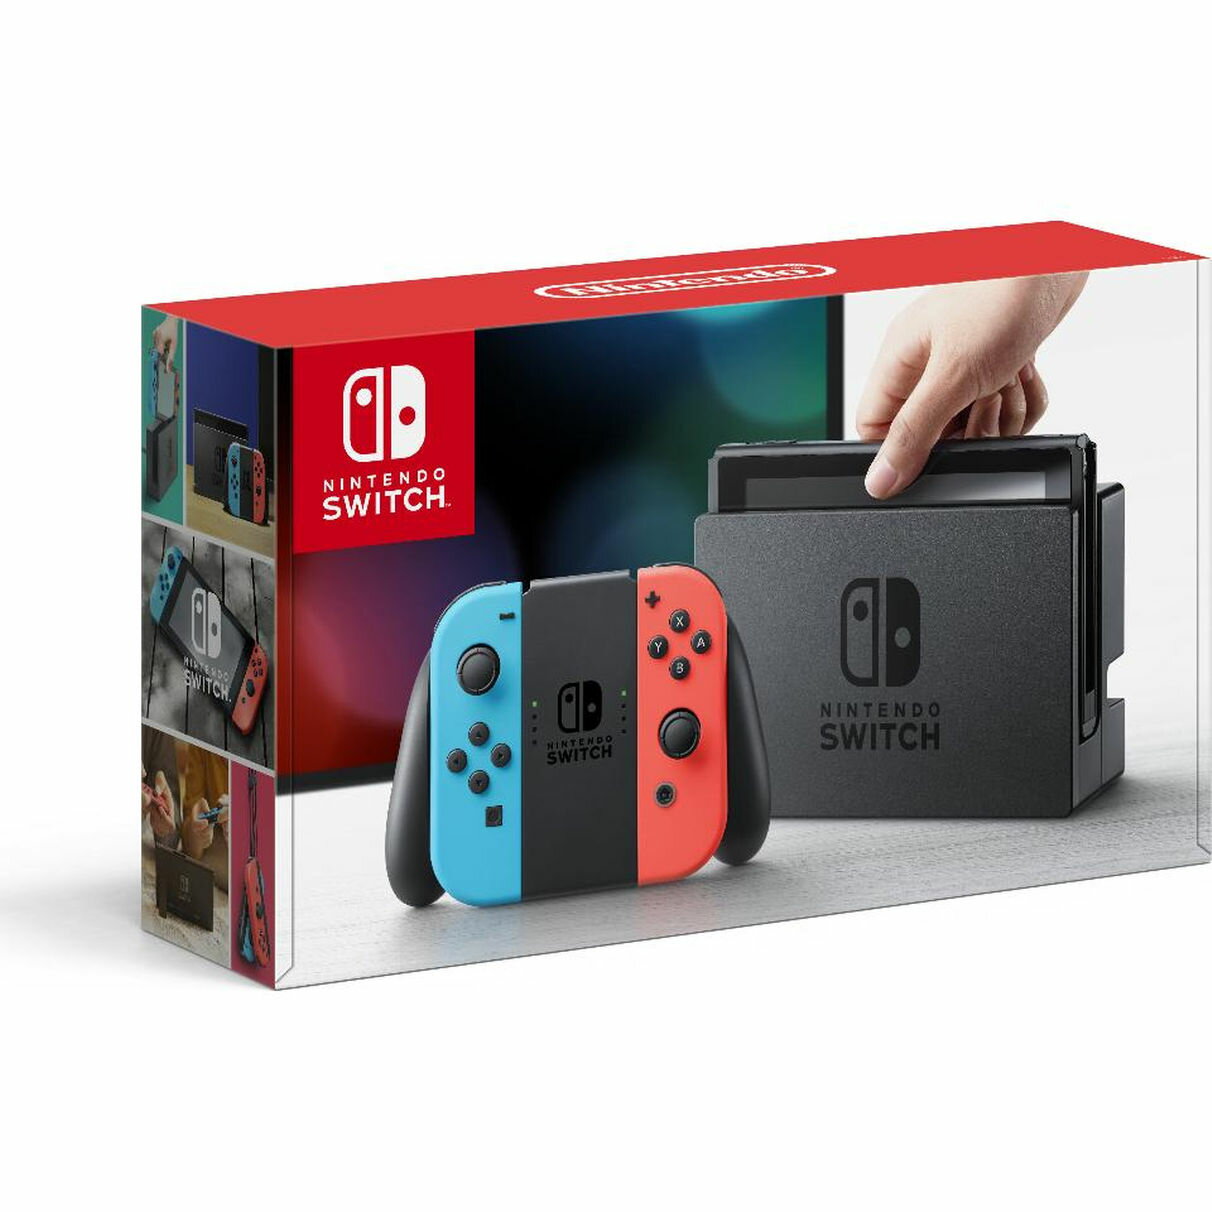 Nintendo Switch Console With Neon Blue And Red Joy Con Wireless Controllers